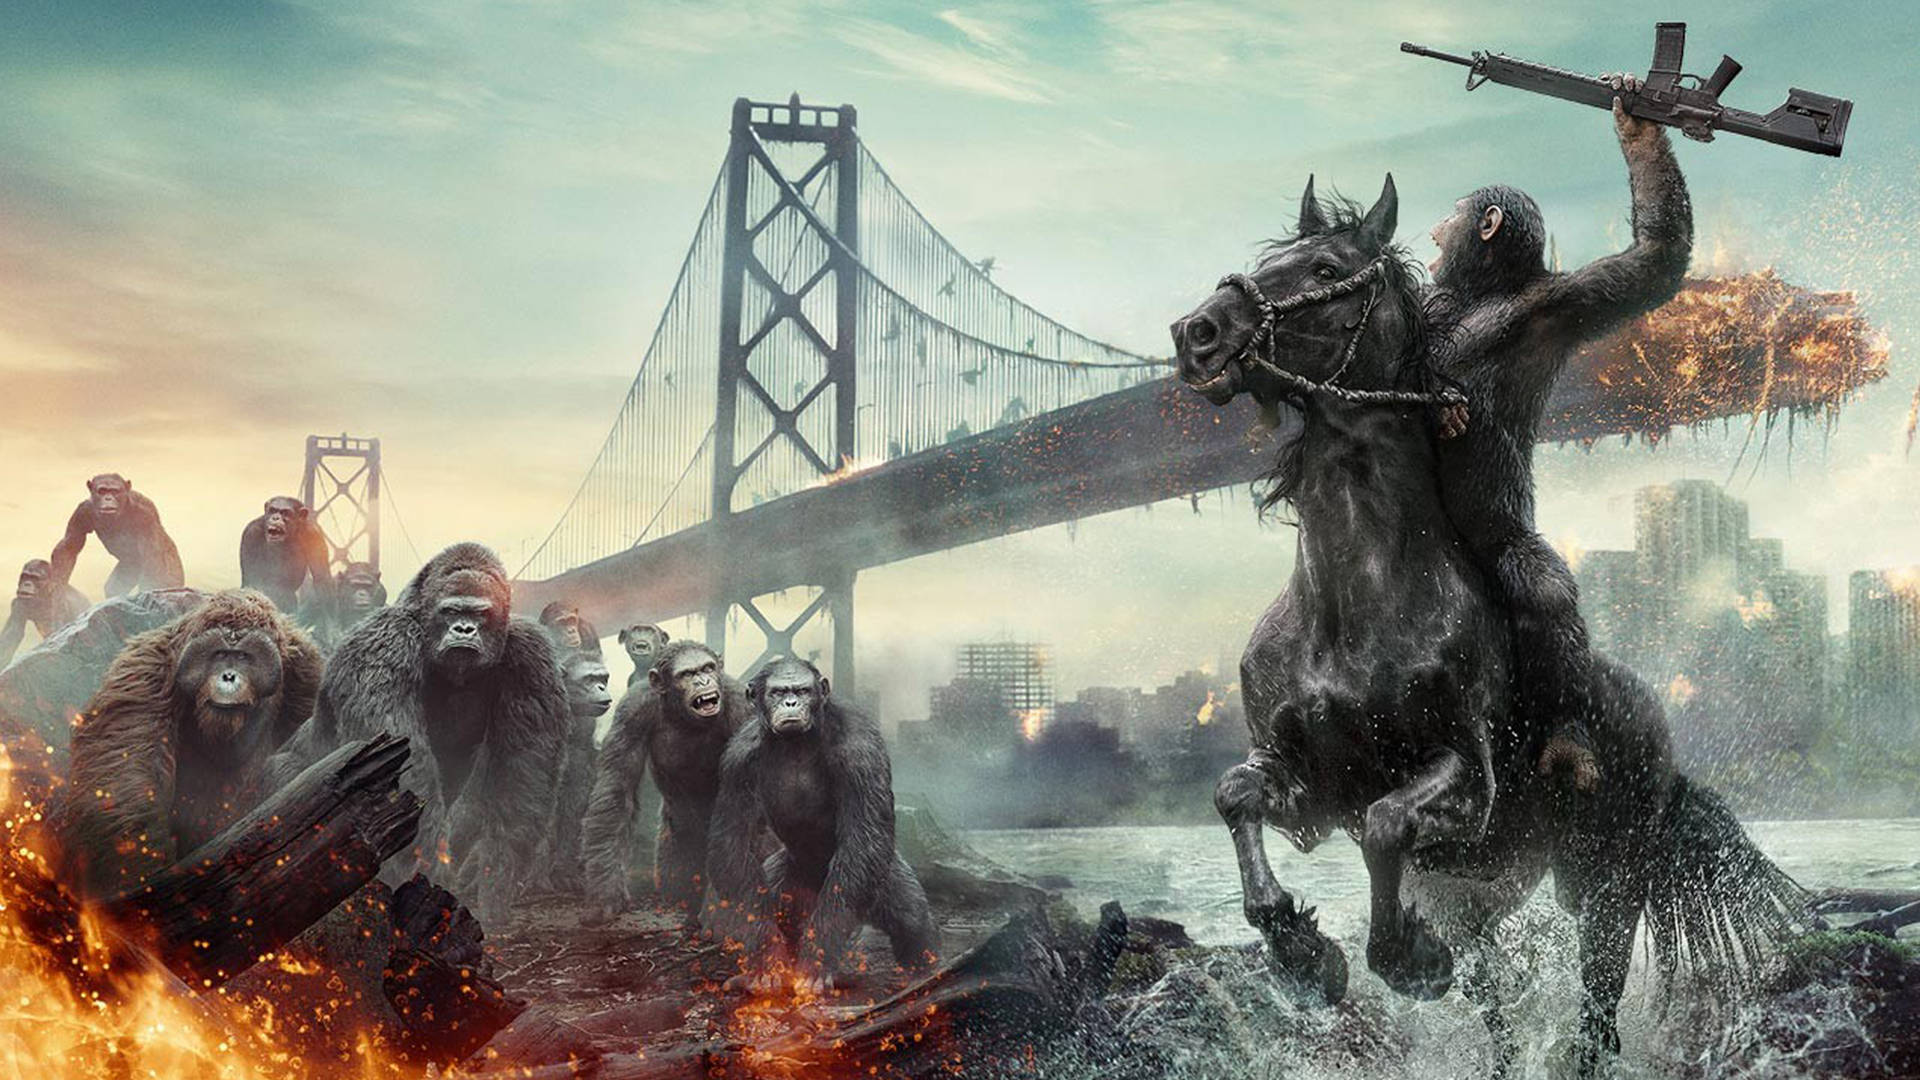 Dawn Of The Planet Of The Apes Movie Poster Wallpaper